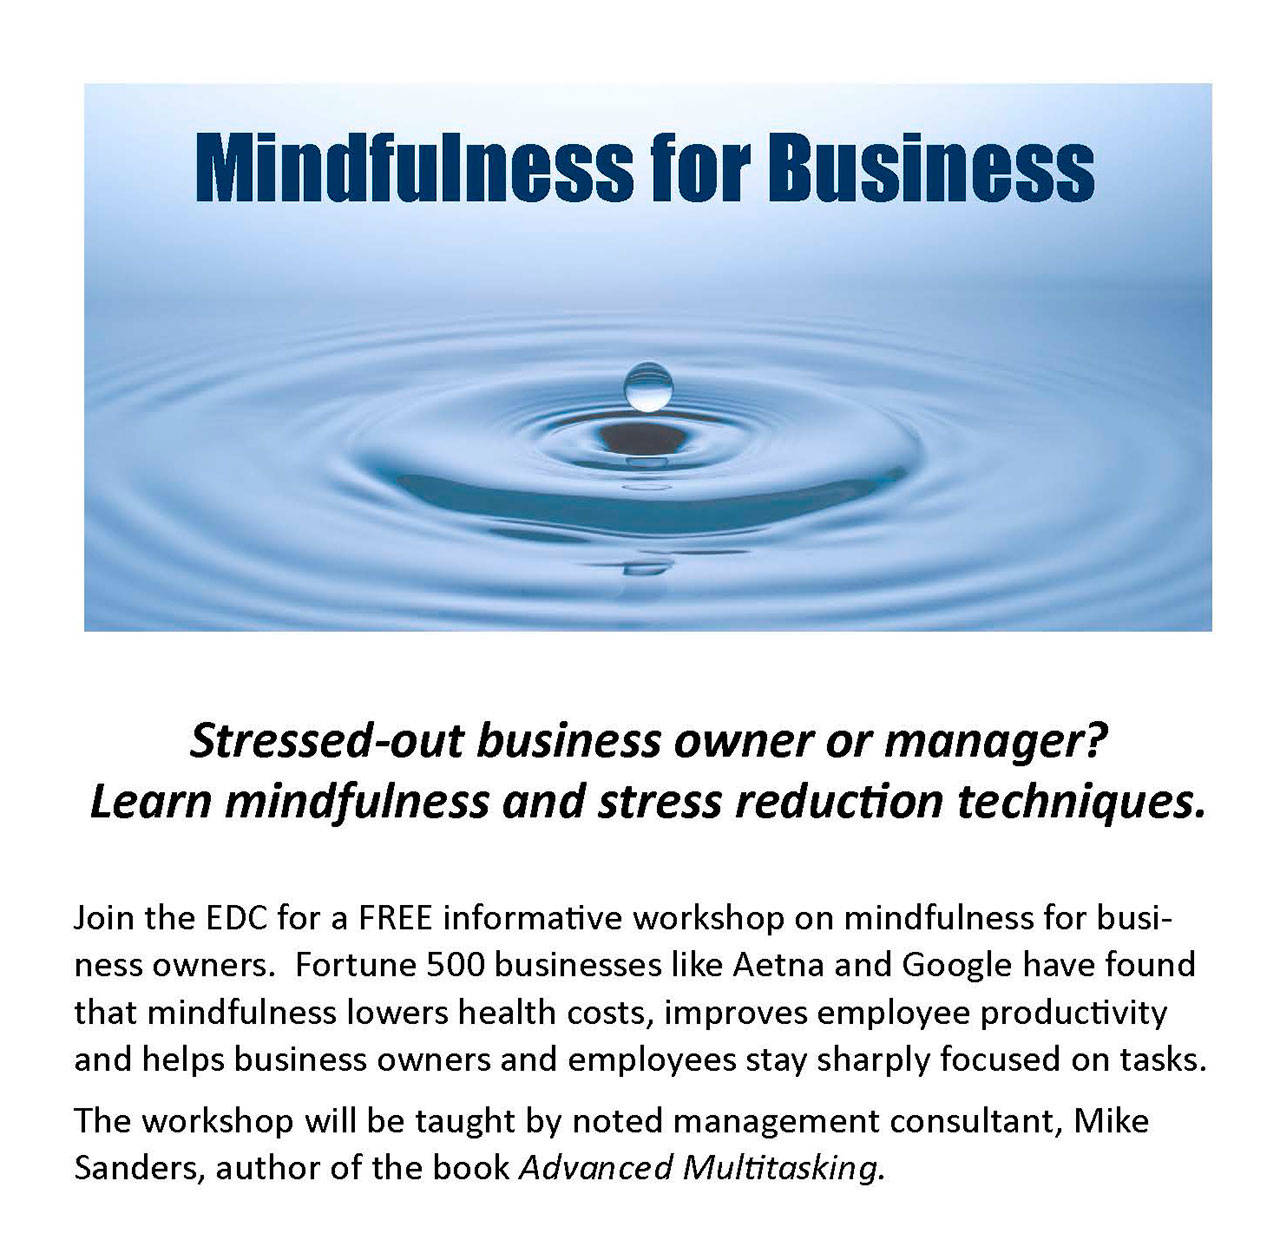 Contributed image/San Juan County Economic Development Council                                According to the EDC, mindfulness lowers health costs, improves employee productivity and helps business owners and employees stay focused on tasks.